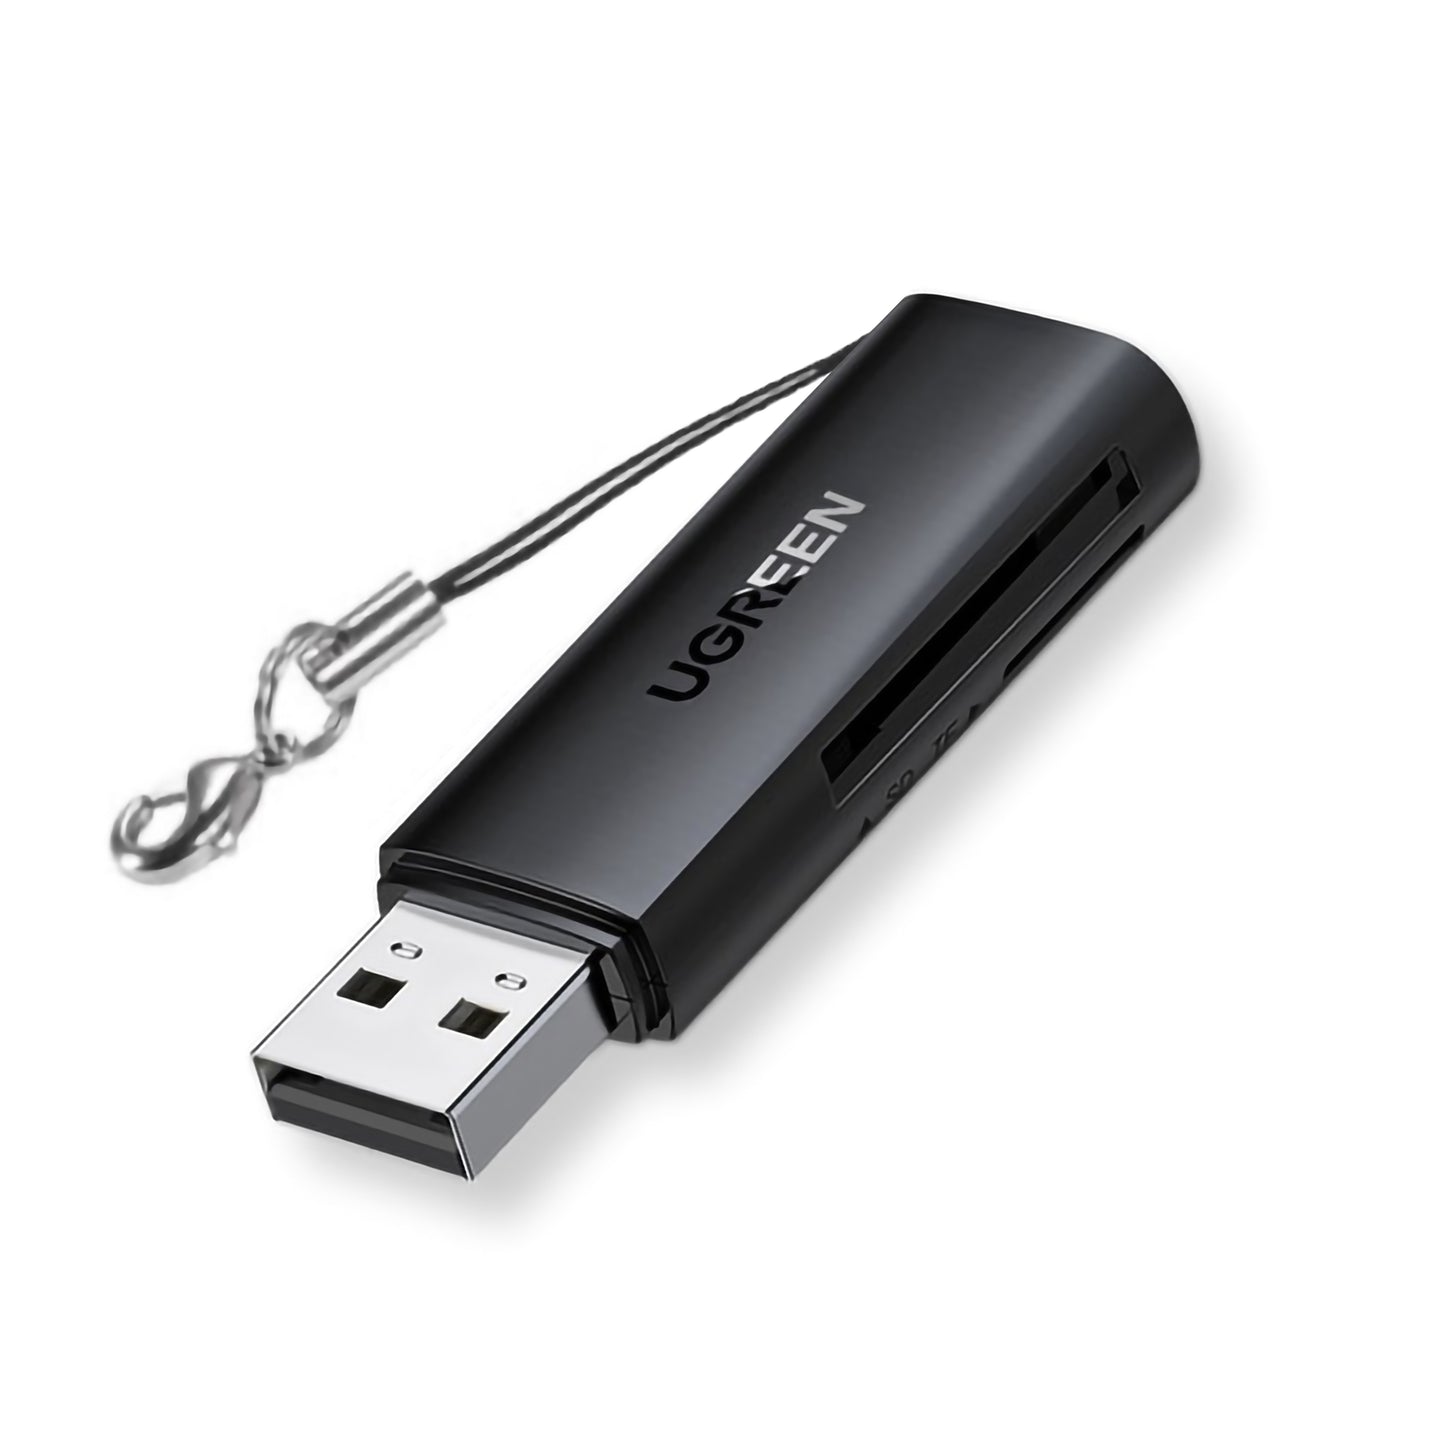 UGREEN SD and MicroSD Card Reader USB 3.0 Flash Drive with 5Gbps Data Transmission Speed for File Transfer and Recovery | 60722